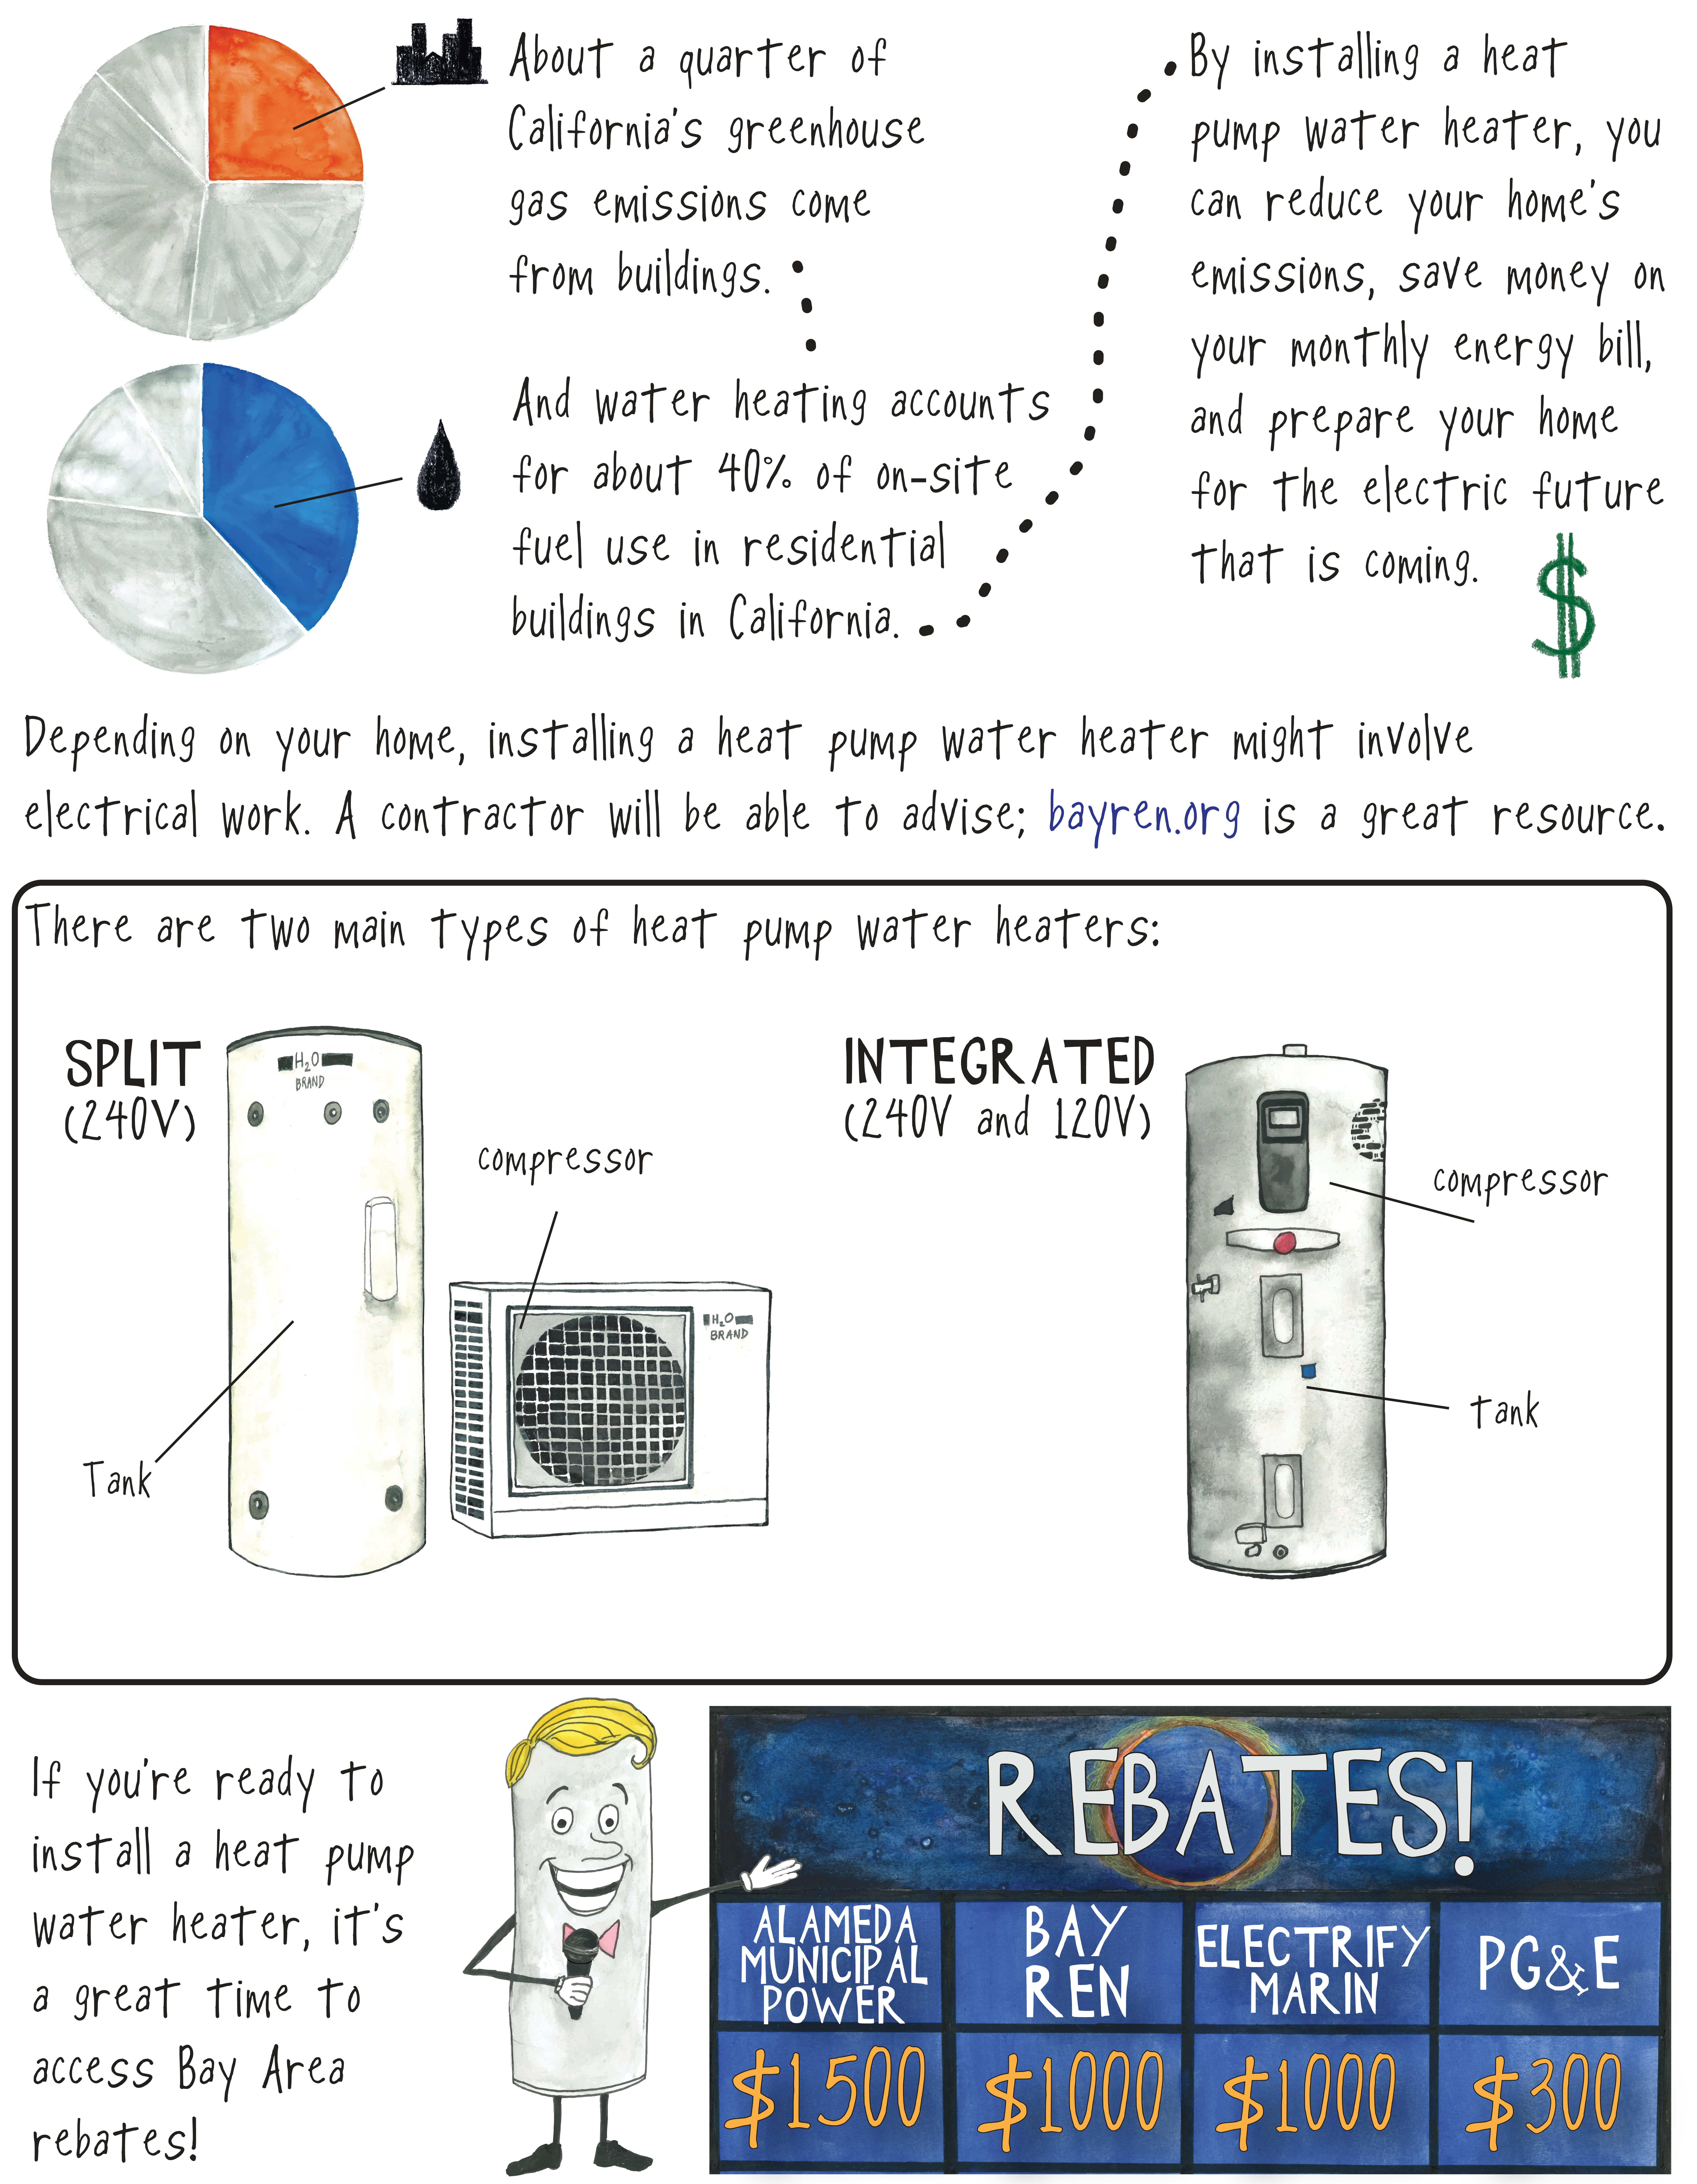 Illustrated series showing the benefits of electric appliances including heat pump water heaters.